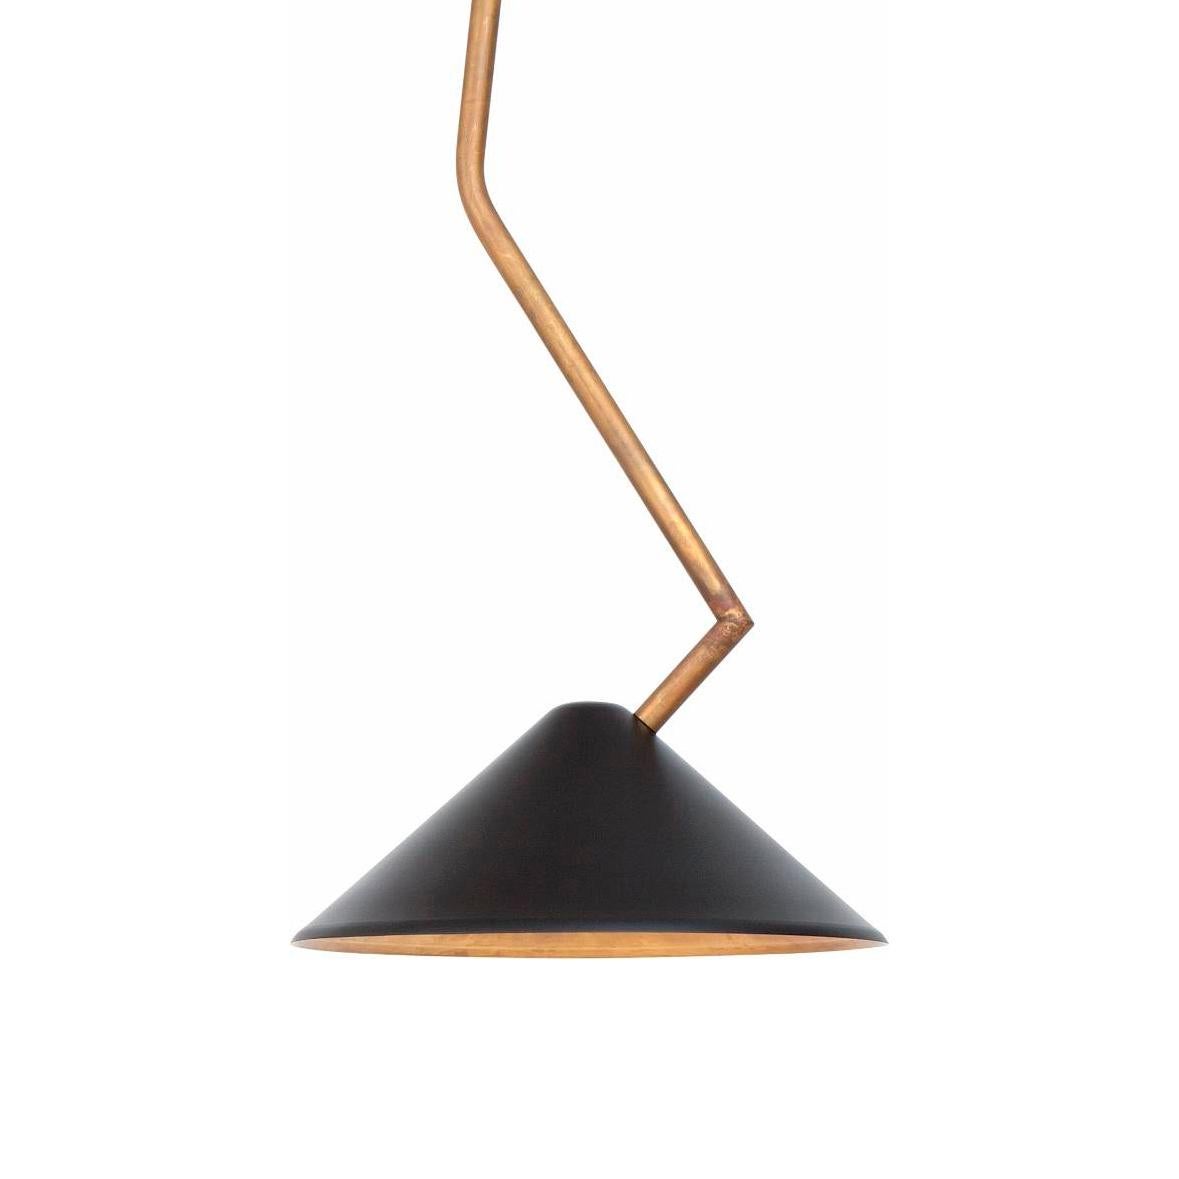 Celing lamp designed by Johan Carpner manufactured by Konsthantverk Tyringe in Sweden.

We offer worlwide shipping for this piece.

Grenverk ceiling
D. 300 mm
H. 750 mm
LED 5 W dimmable
Ceiling cup, hook mounted 
3427-7 Raw brass/black (one)

The